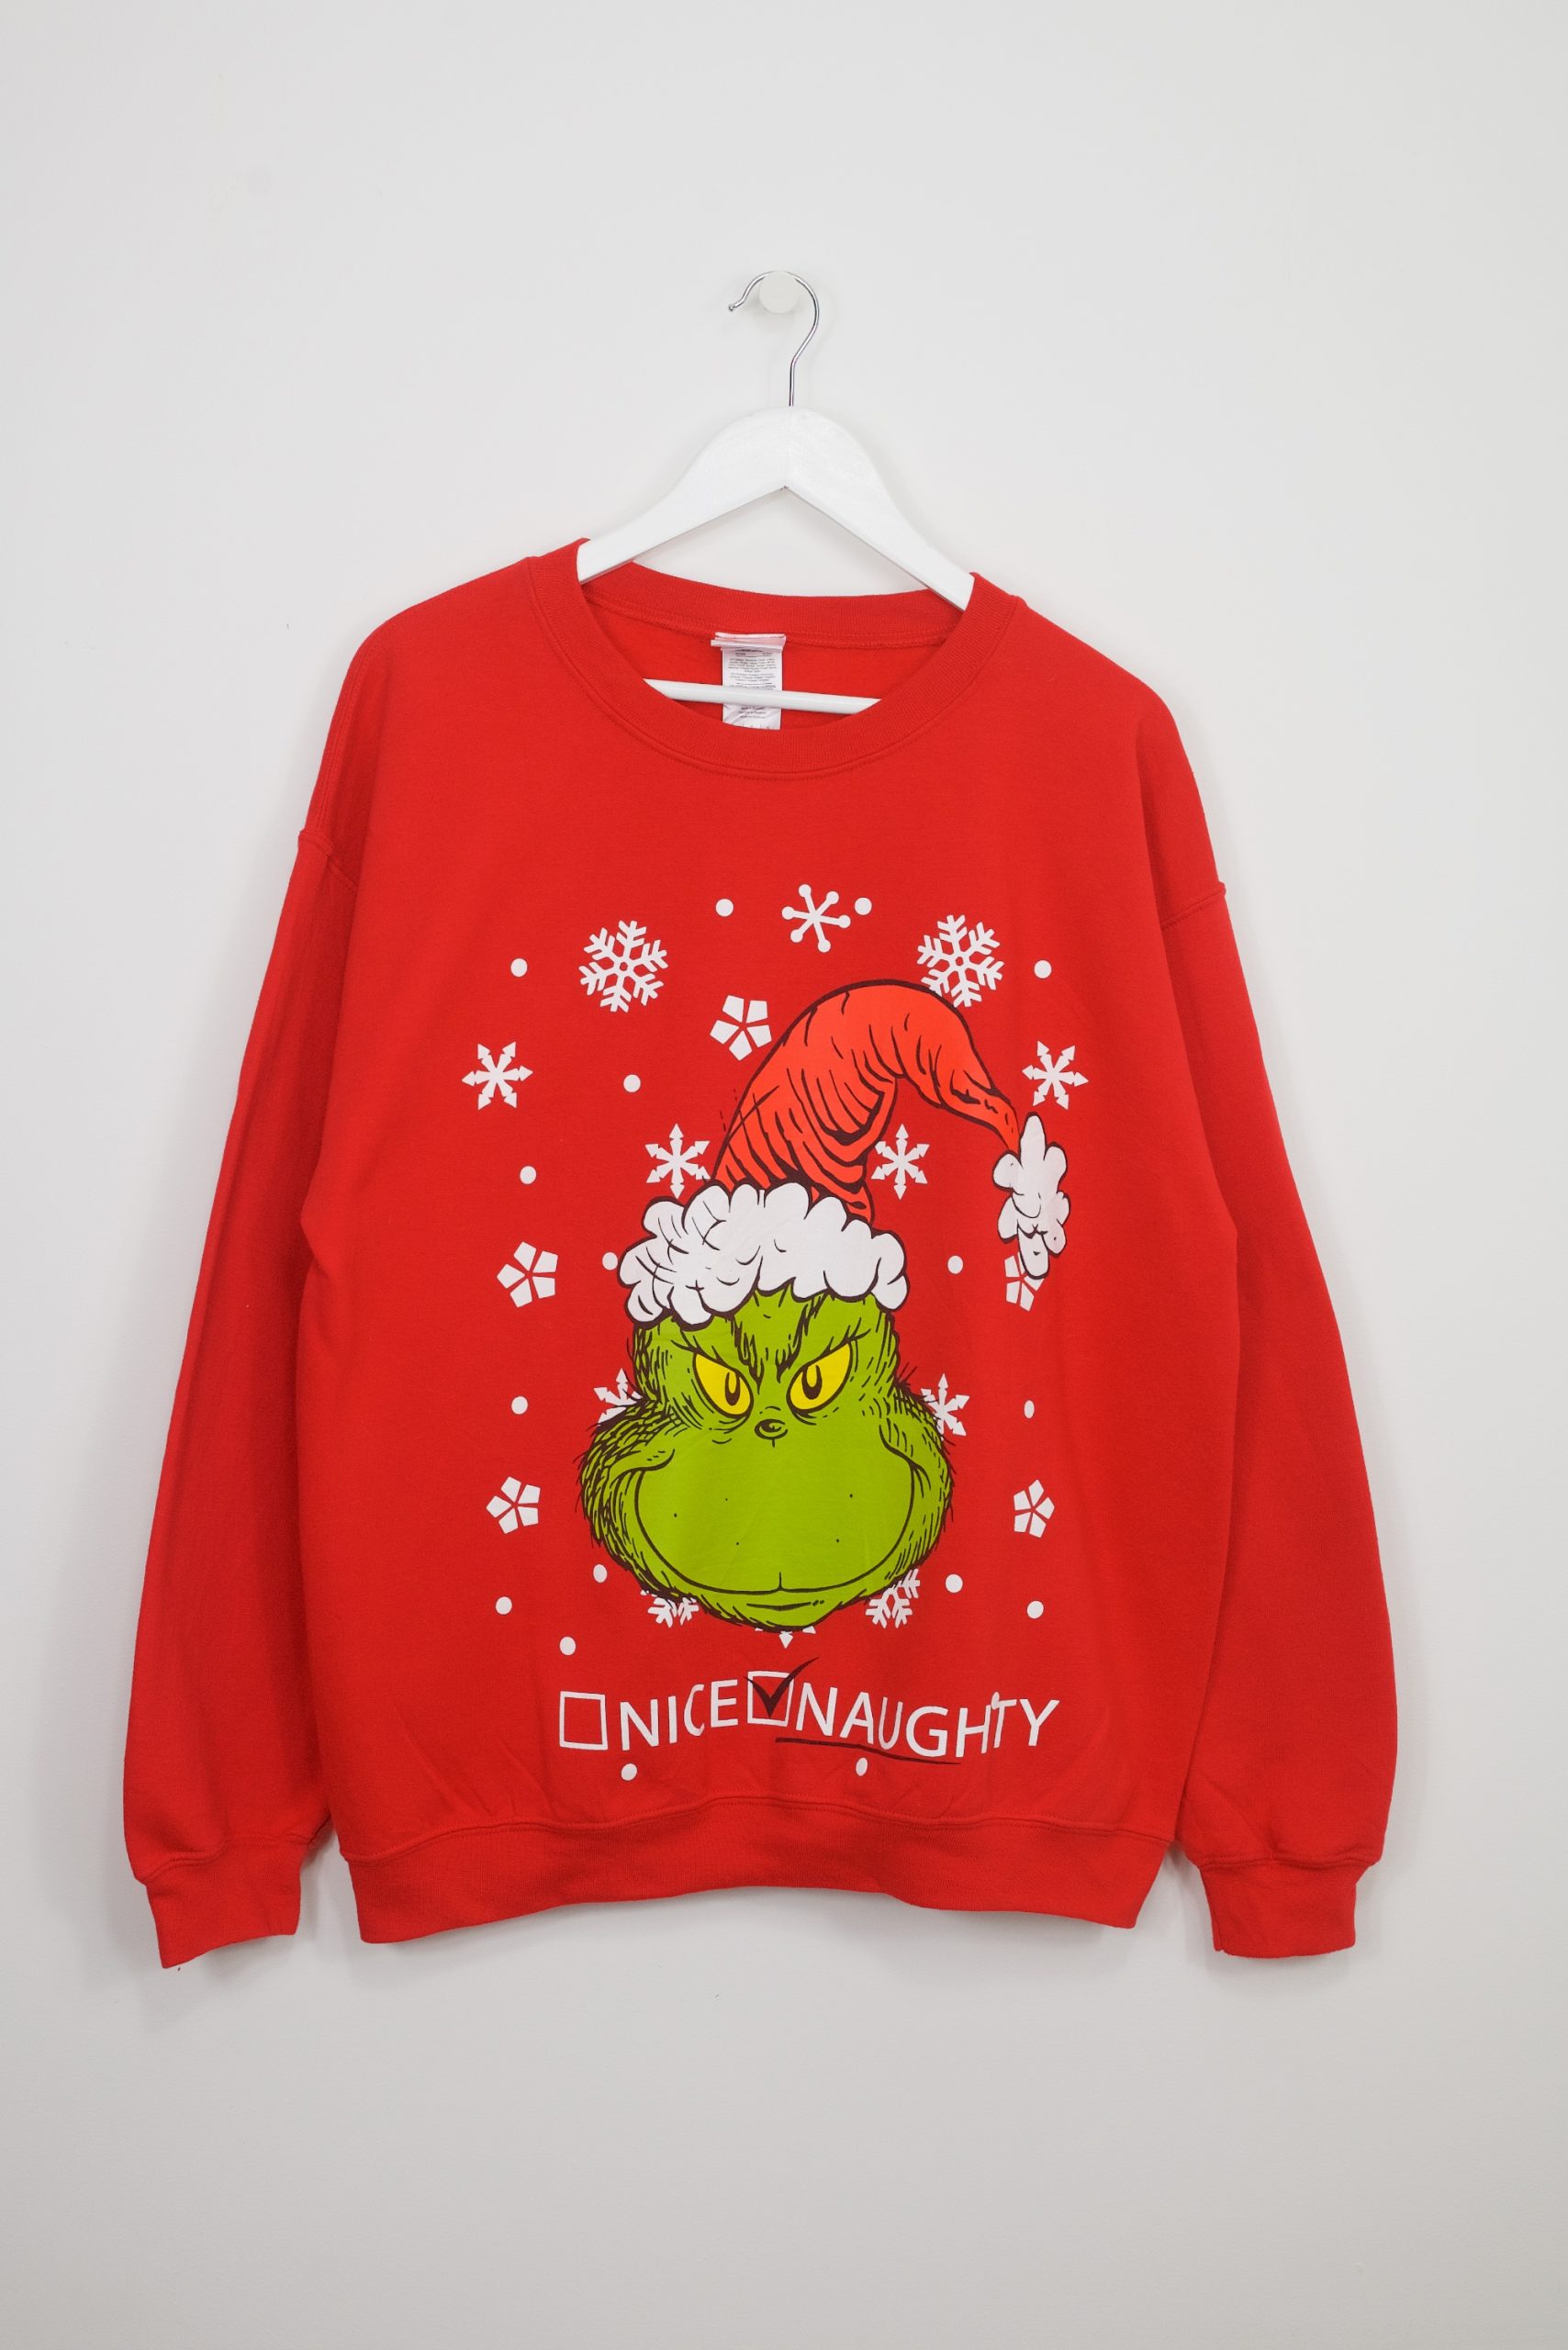 Grinch Christmas Sweater | Save the Children Shop